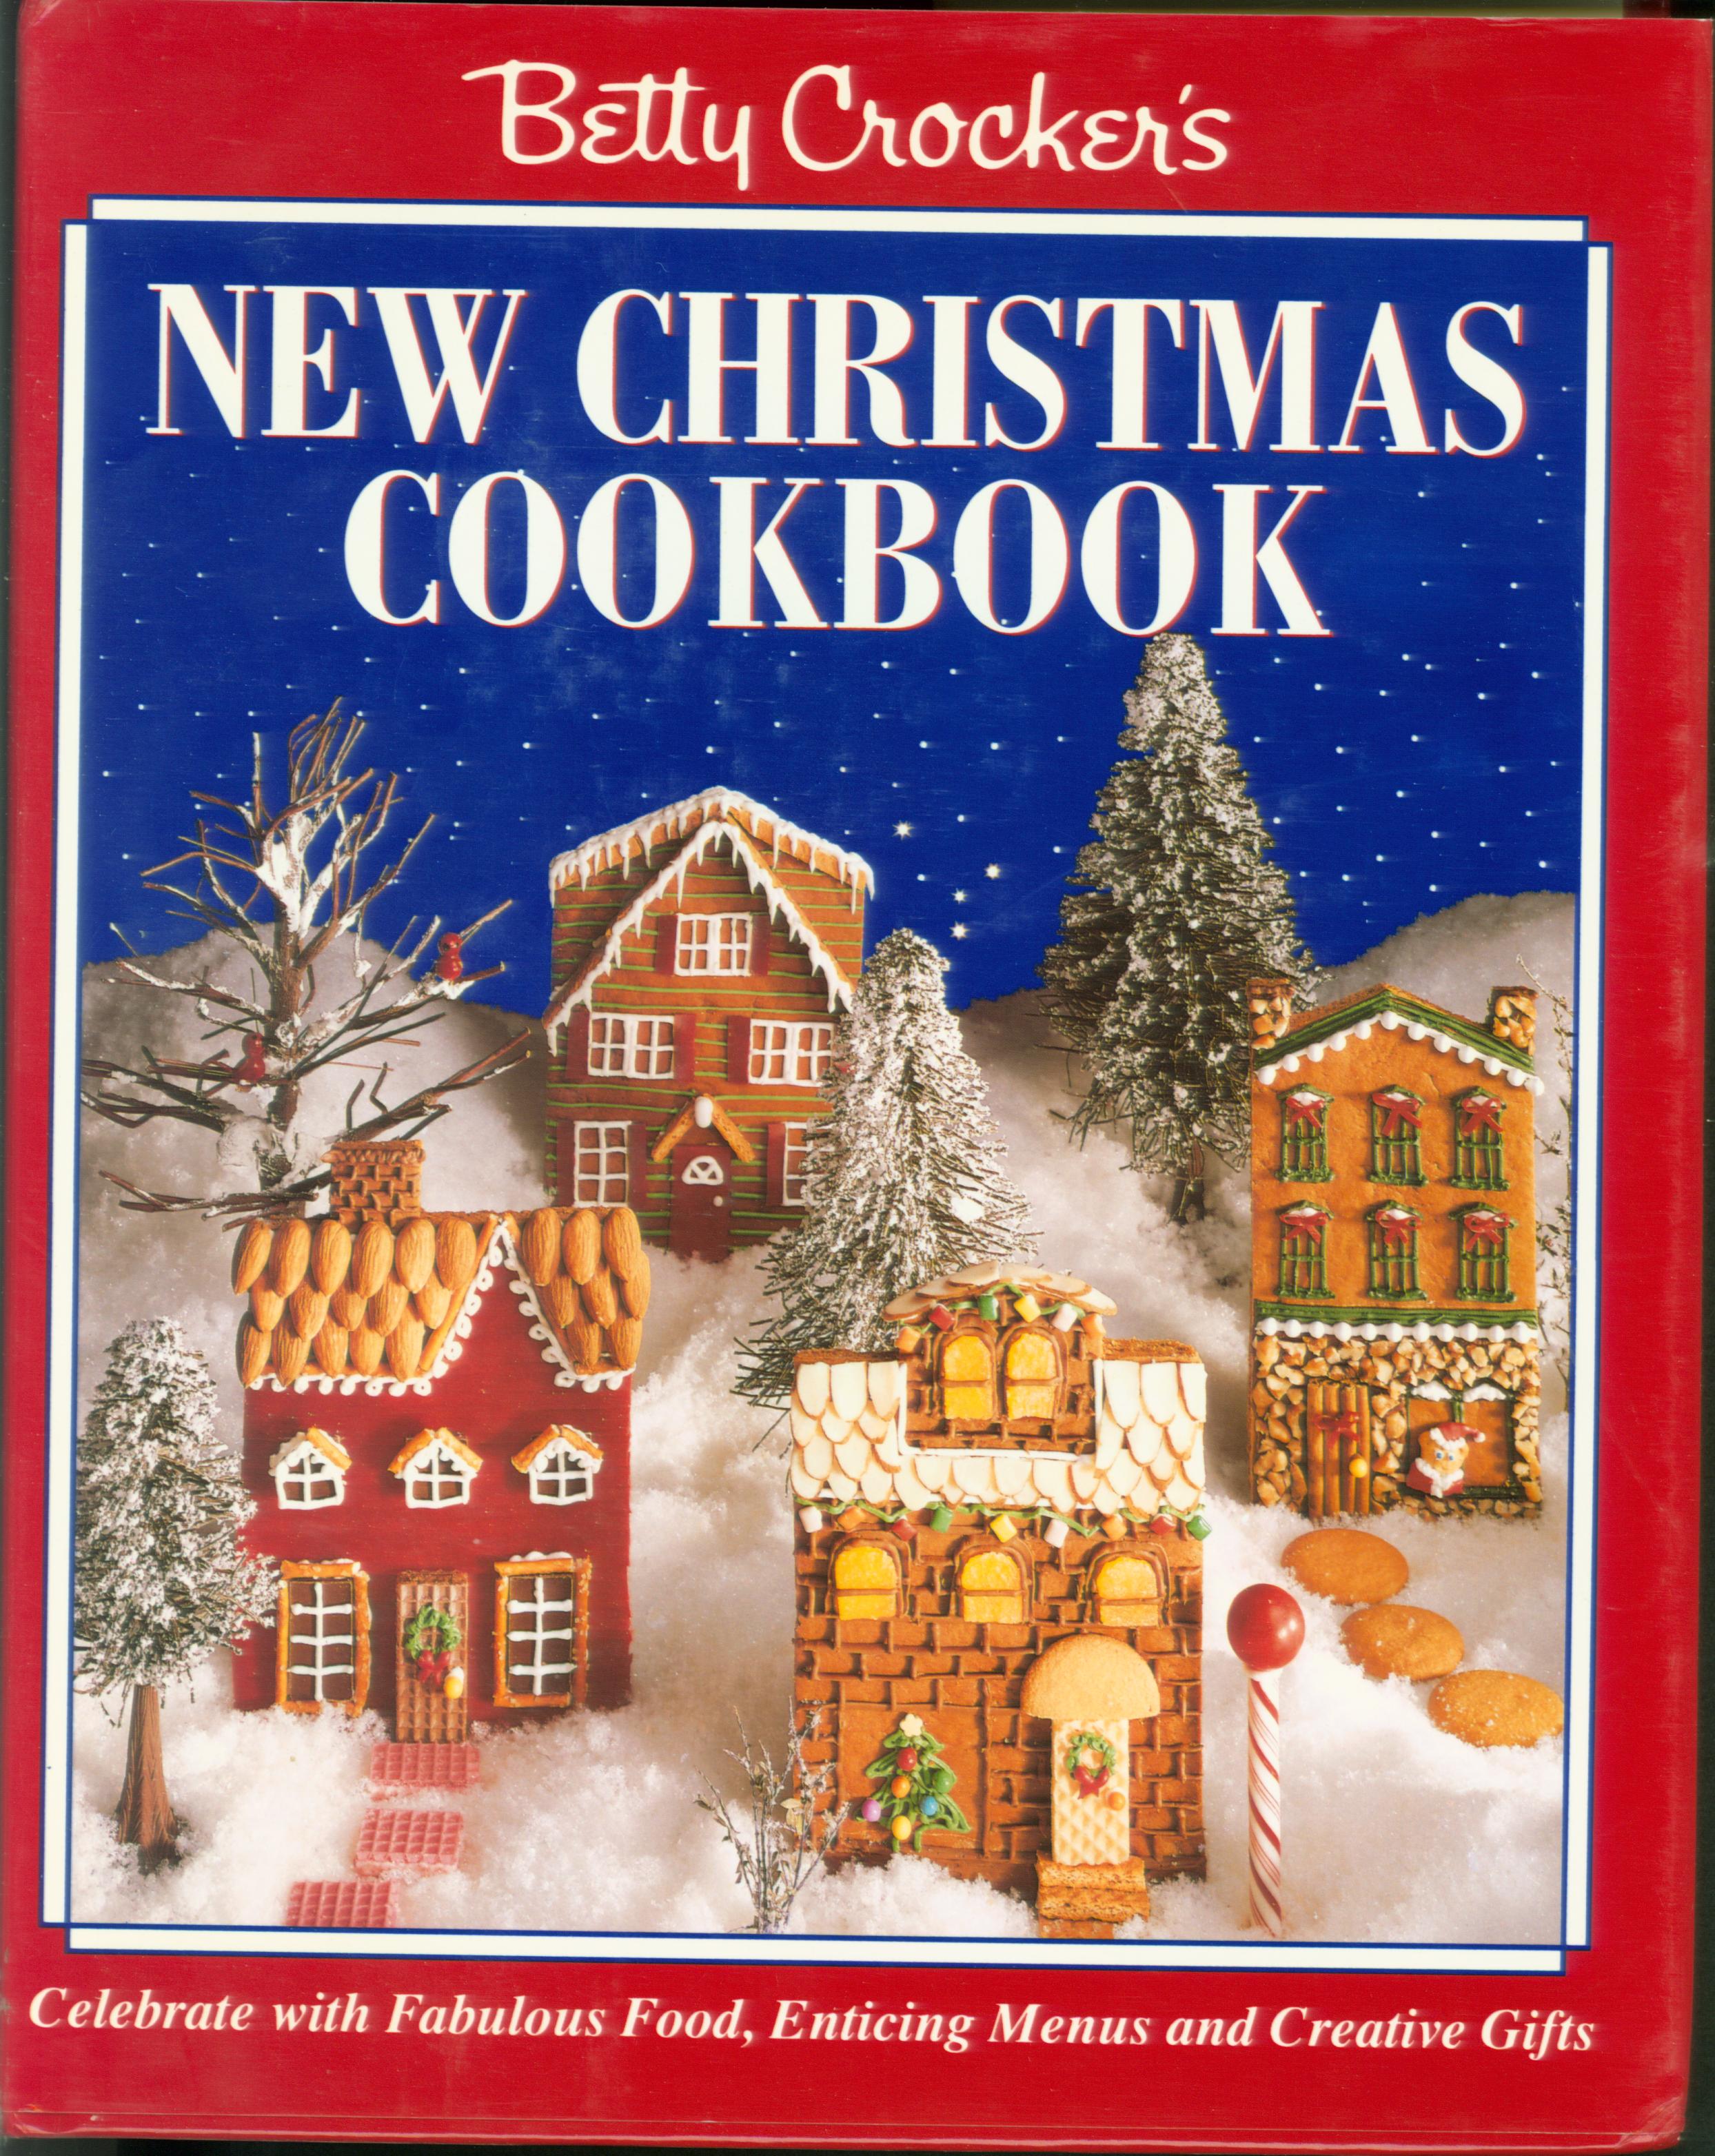 BETTY CROCKER'S NEW CHRISTMAS COOKBOOK: celebrate with fabulous food, enticing menus, and creative gifts. 